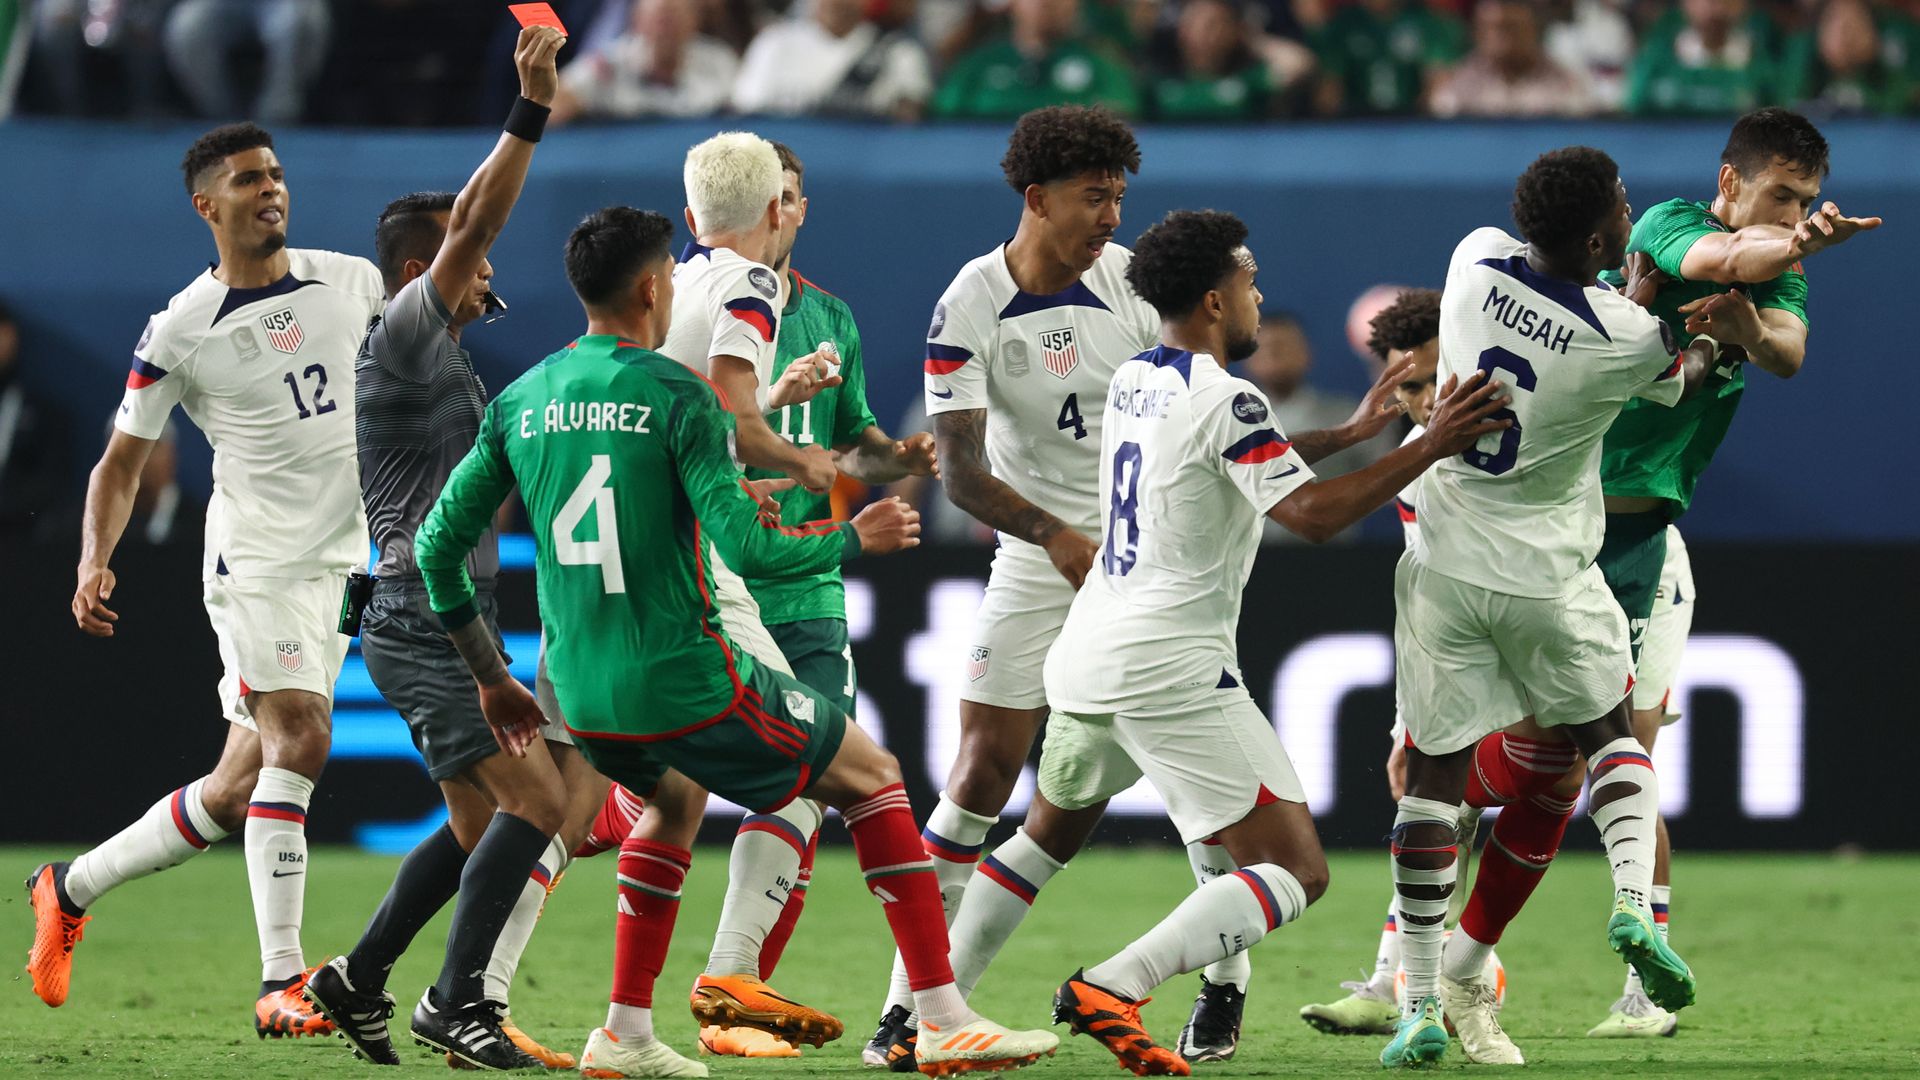 USA's win over Mexico cut short by homophobic chants